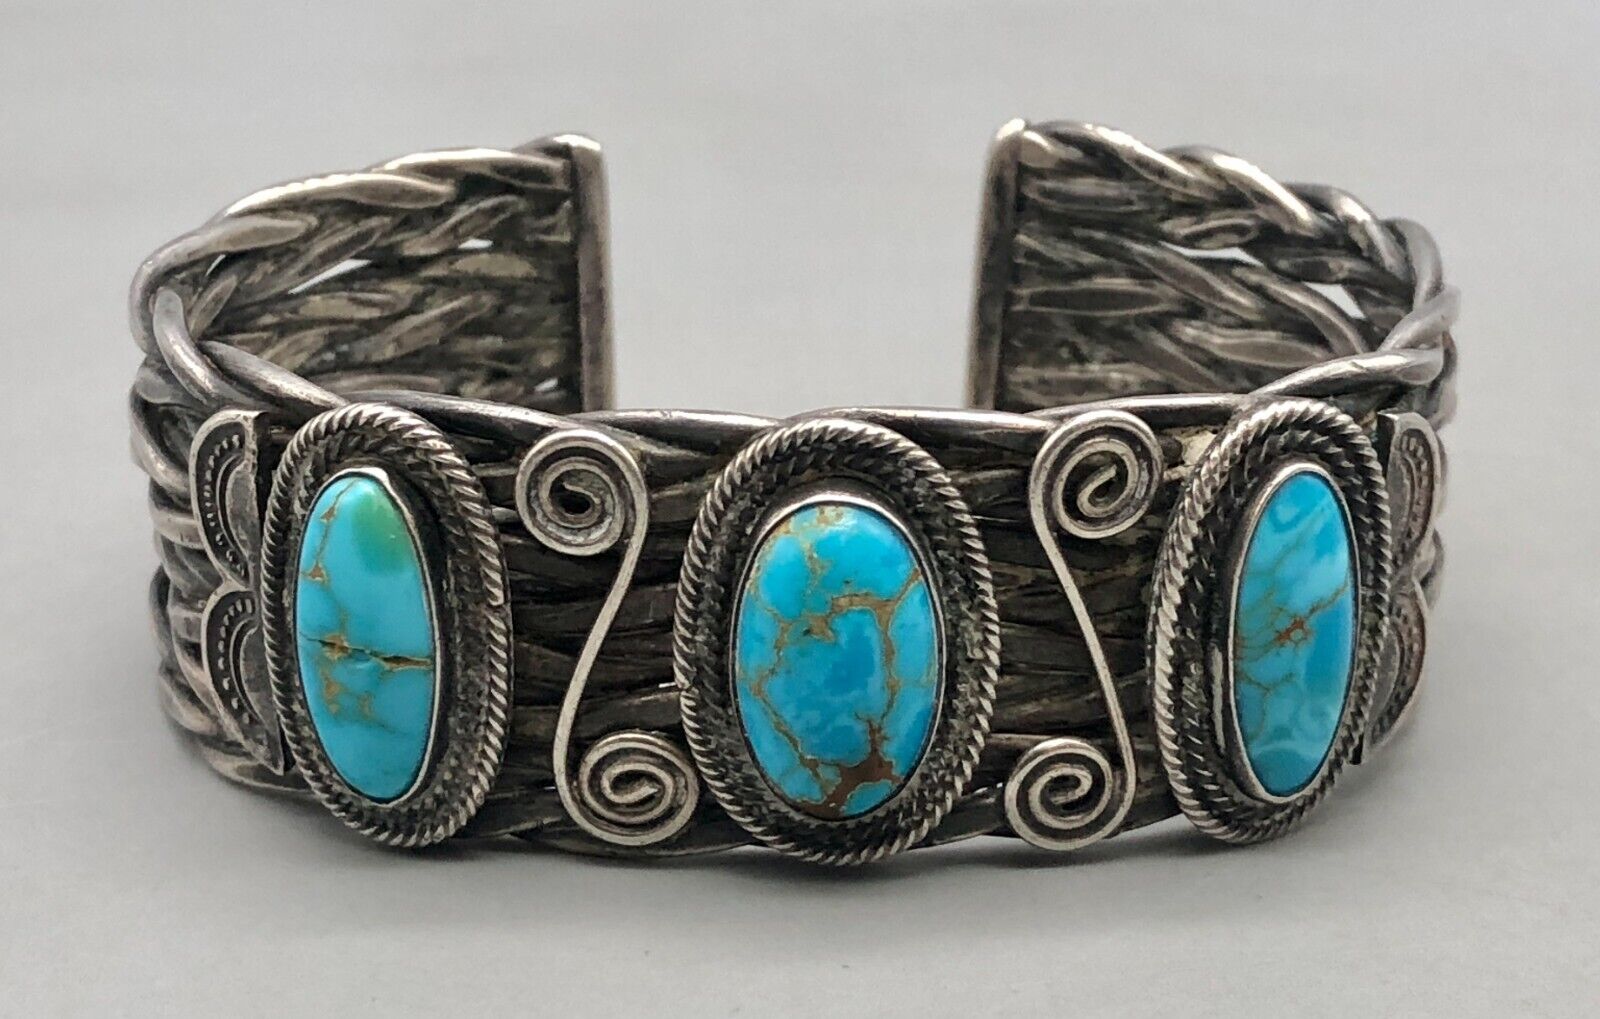 Circa 1920s-1930s Handmade Braided Wire and Turquoise Bracelet